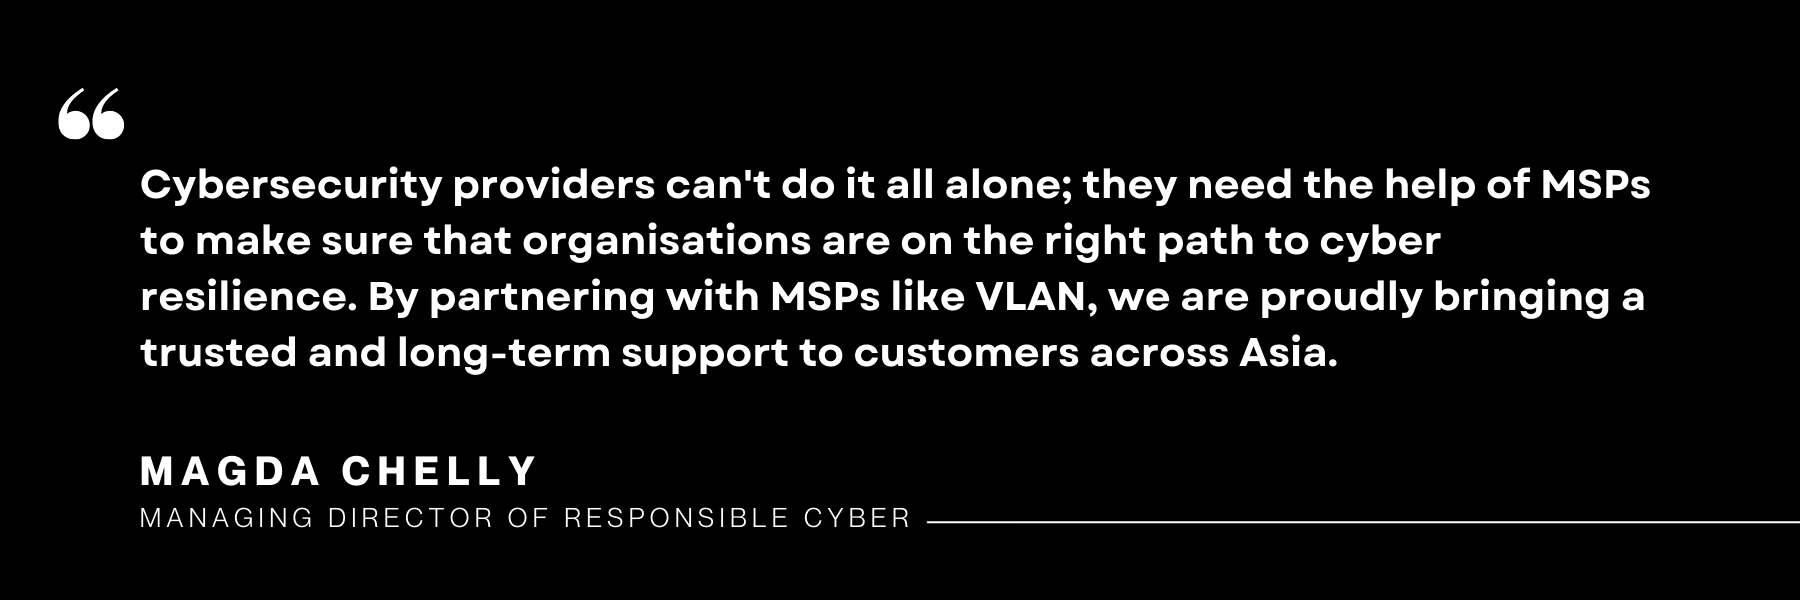 responsible cyber cybersecurity singapore MoU with VLAN Asia Malaysia